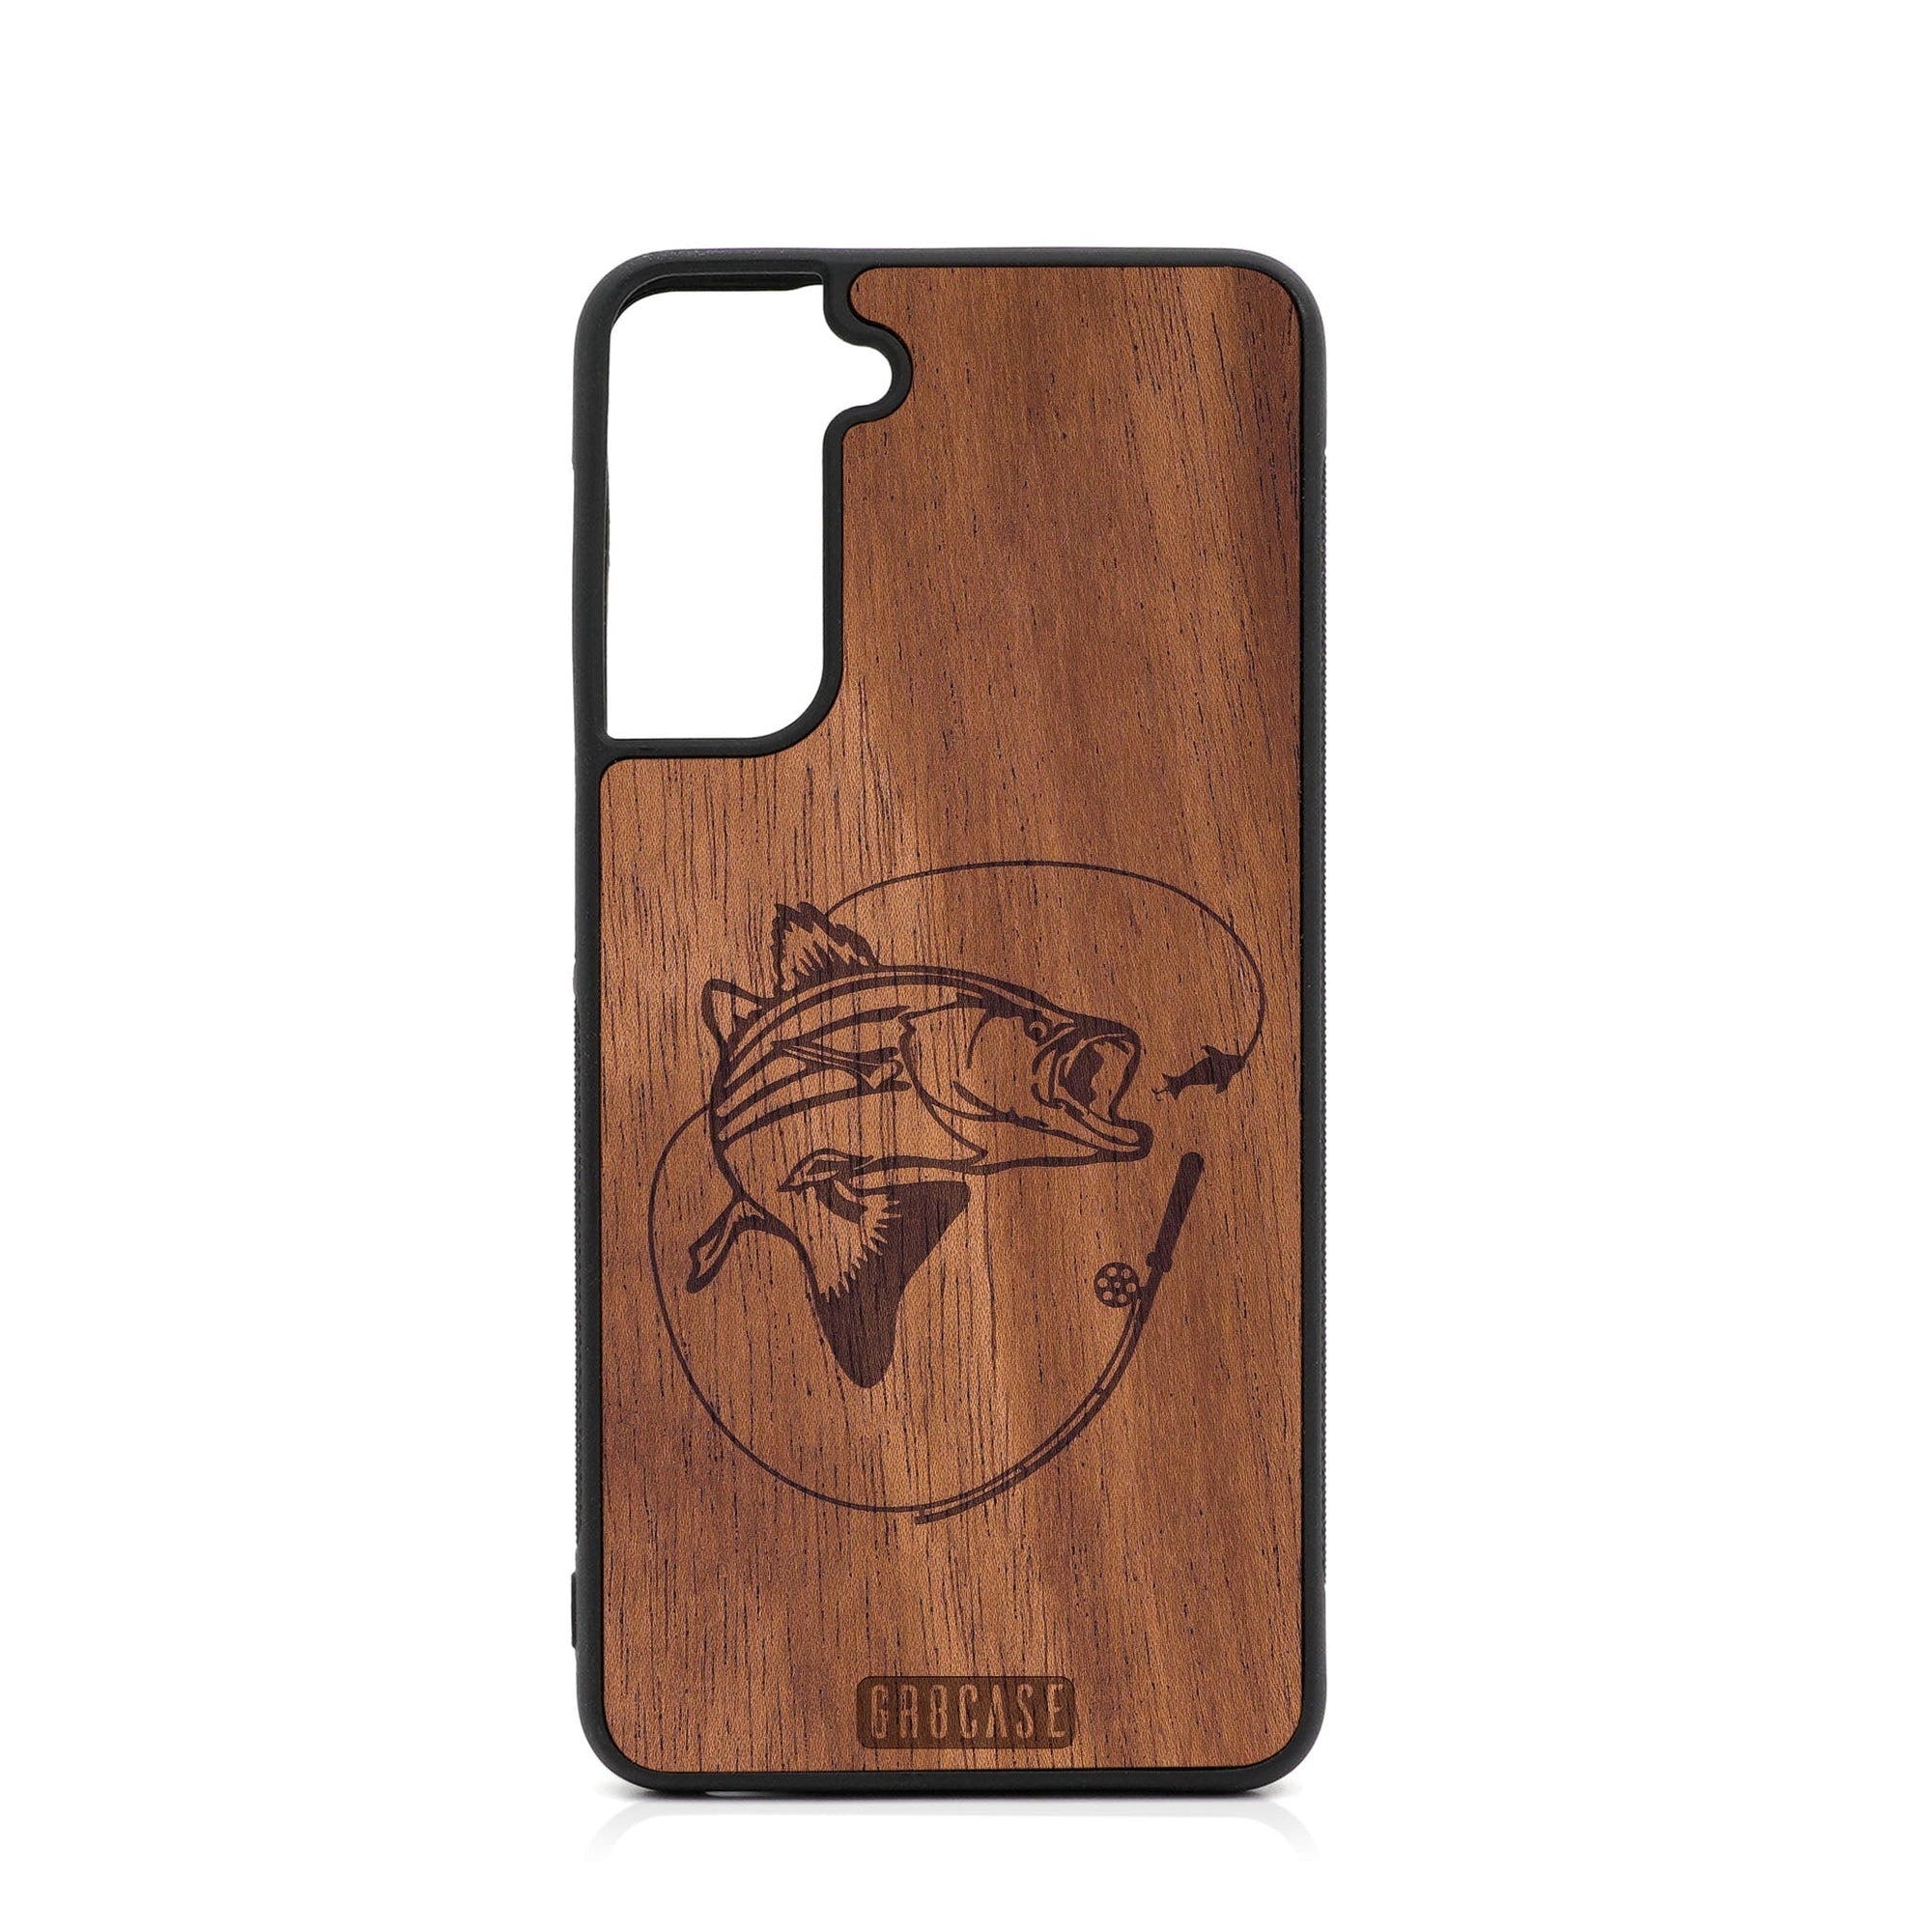 Fish and Reel Design Wood Case For Samsung Galaxy S21 FE 5G